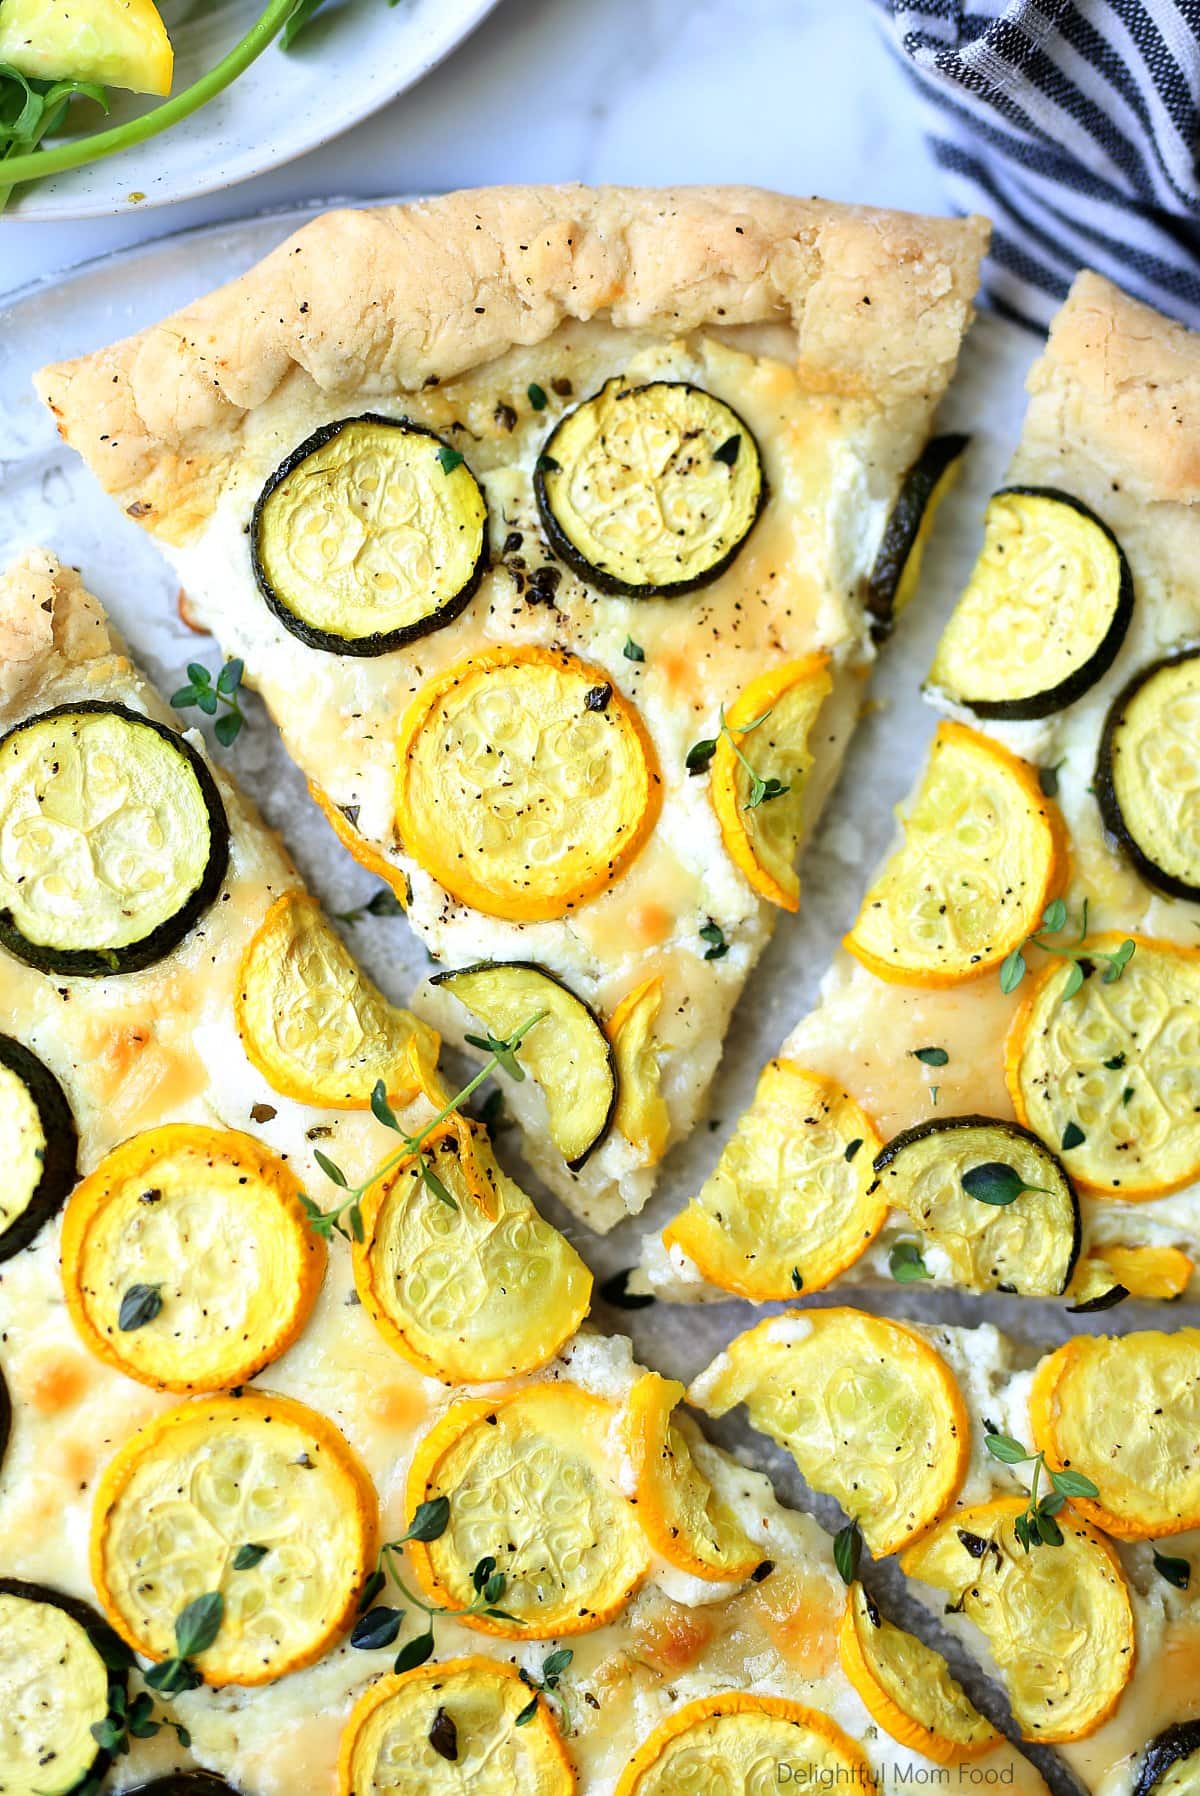 Slice of gluten-free zucchini pizza with a white cheese spread on a pizza pan